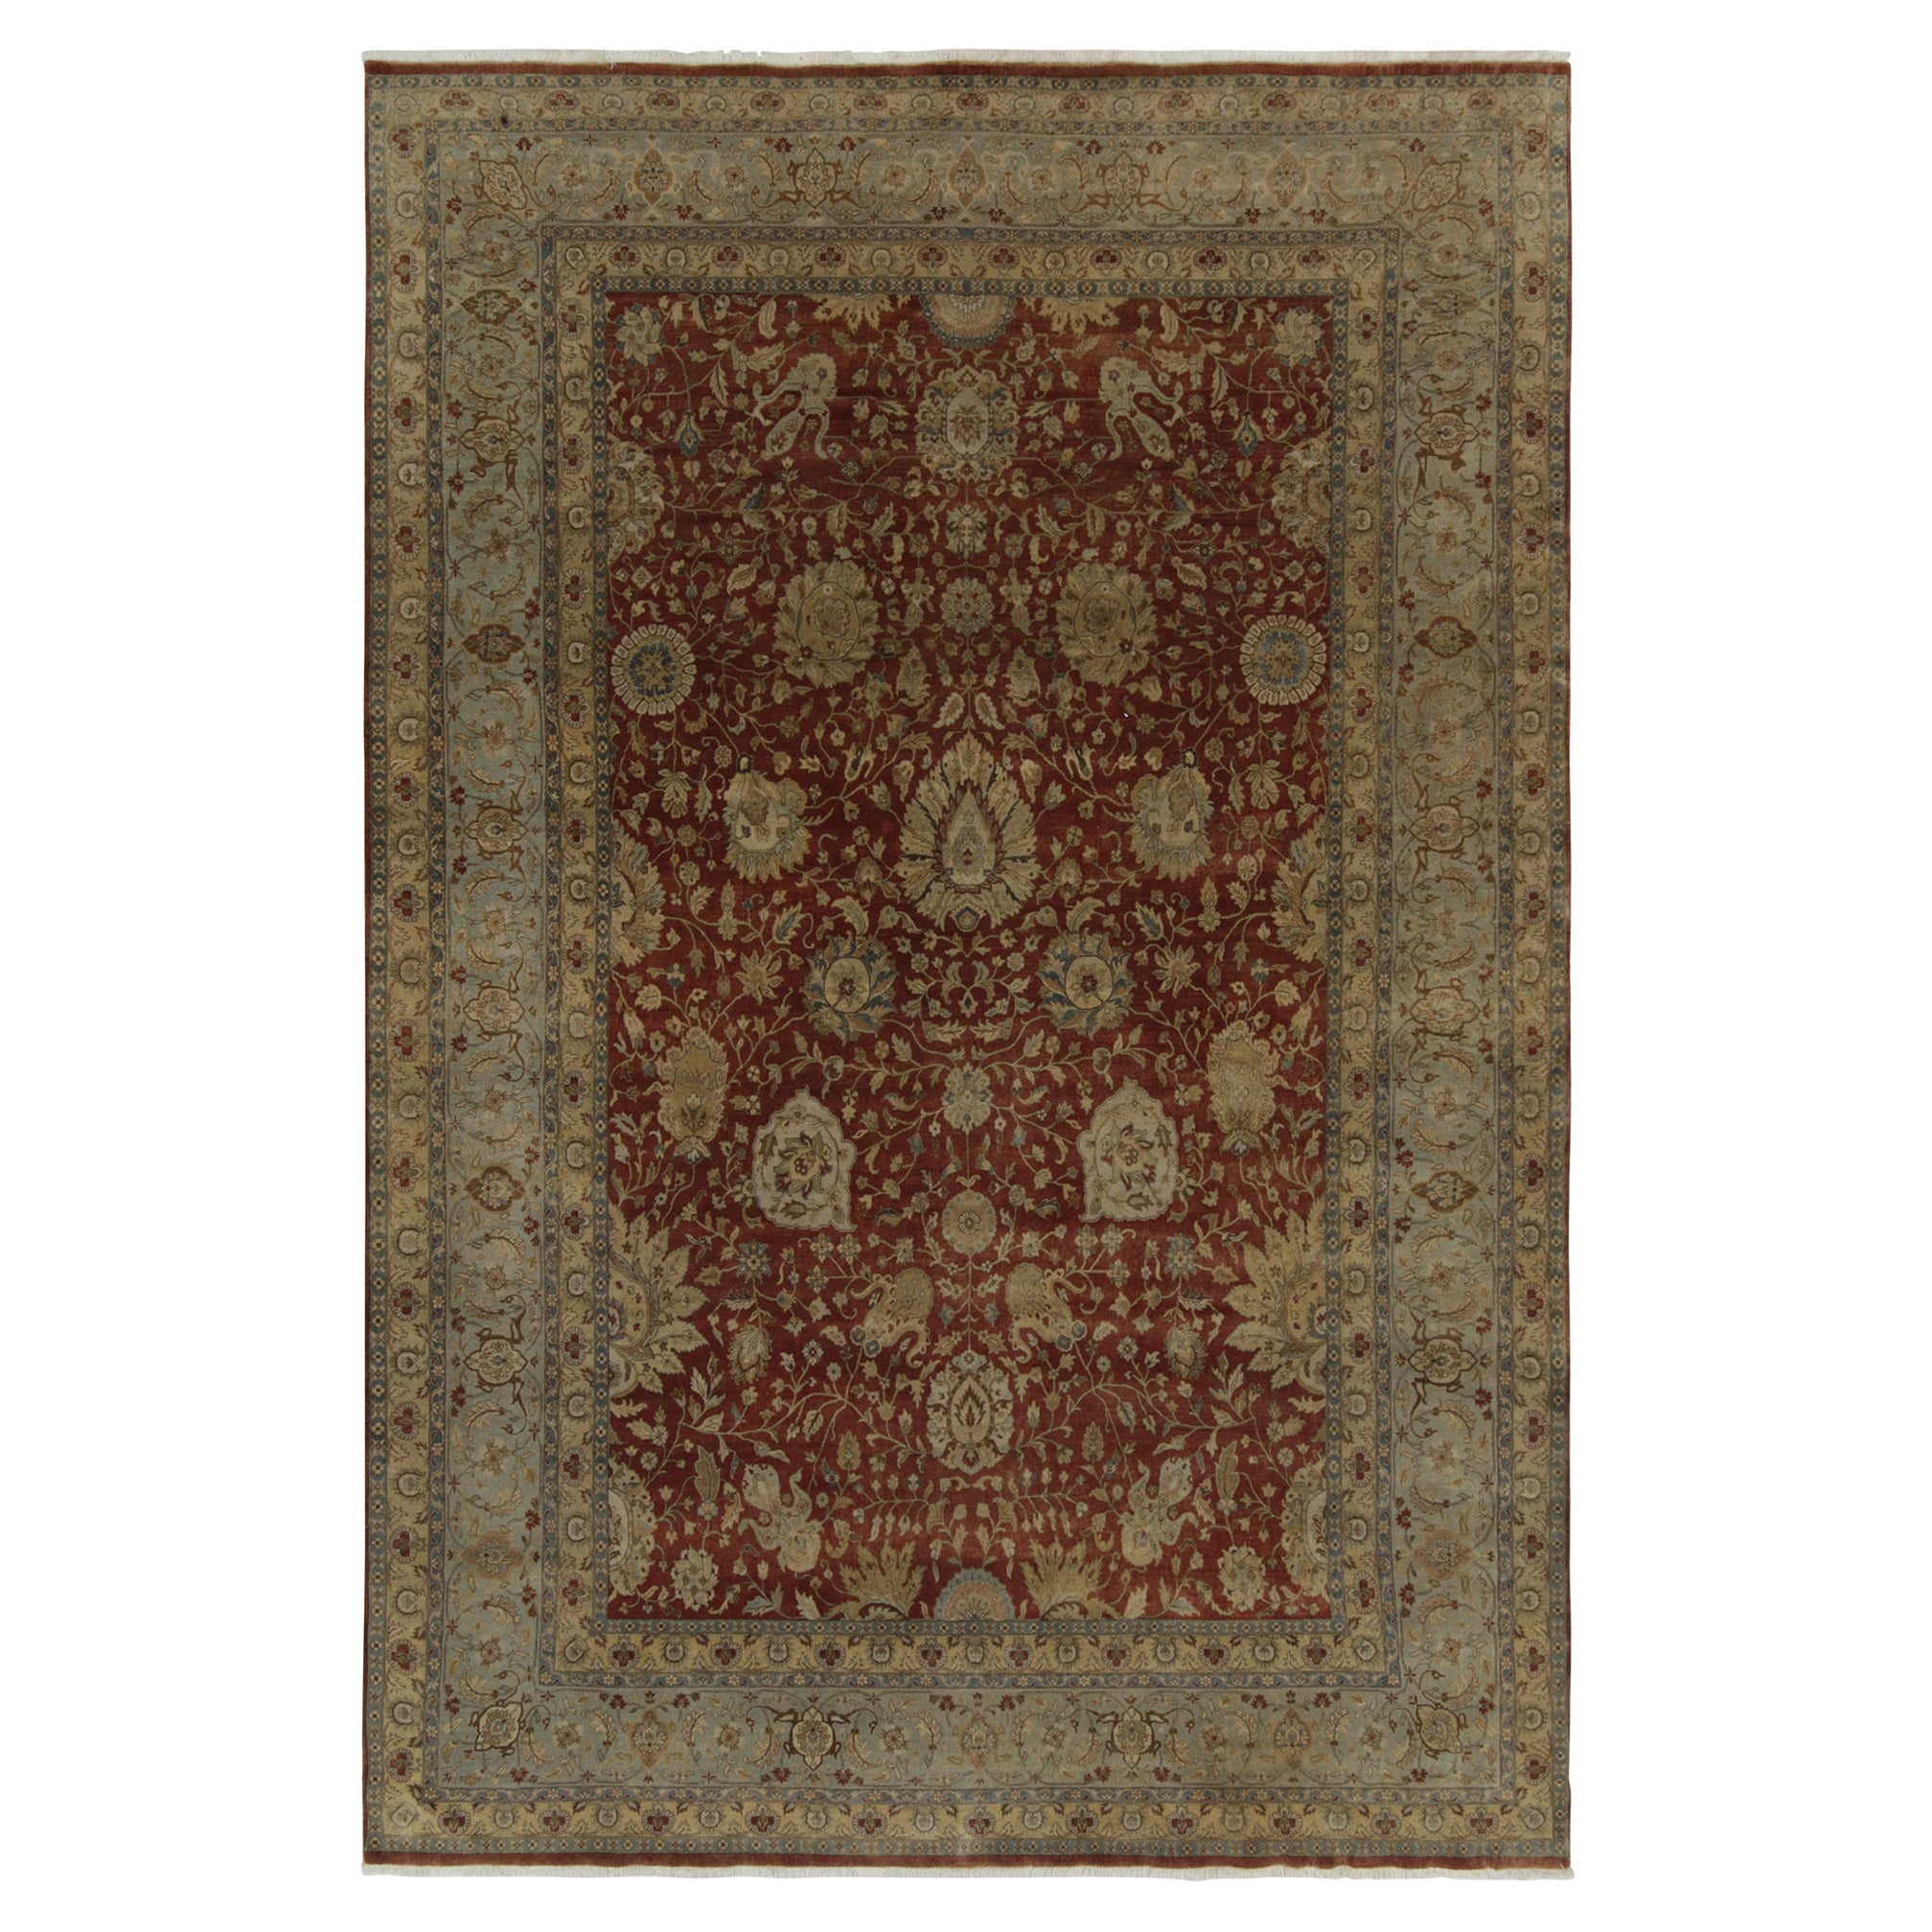 Rug & Kilim’s Classic Tabriz style rug with Beige & Blue Florals on Rust Red For Sale